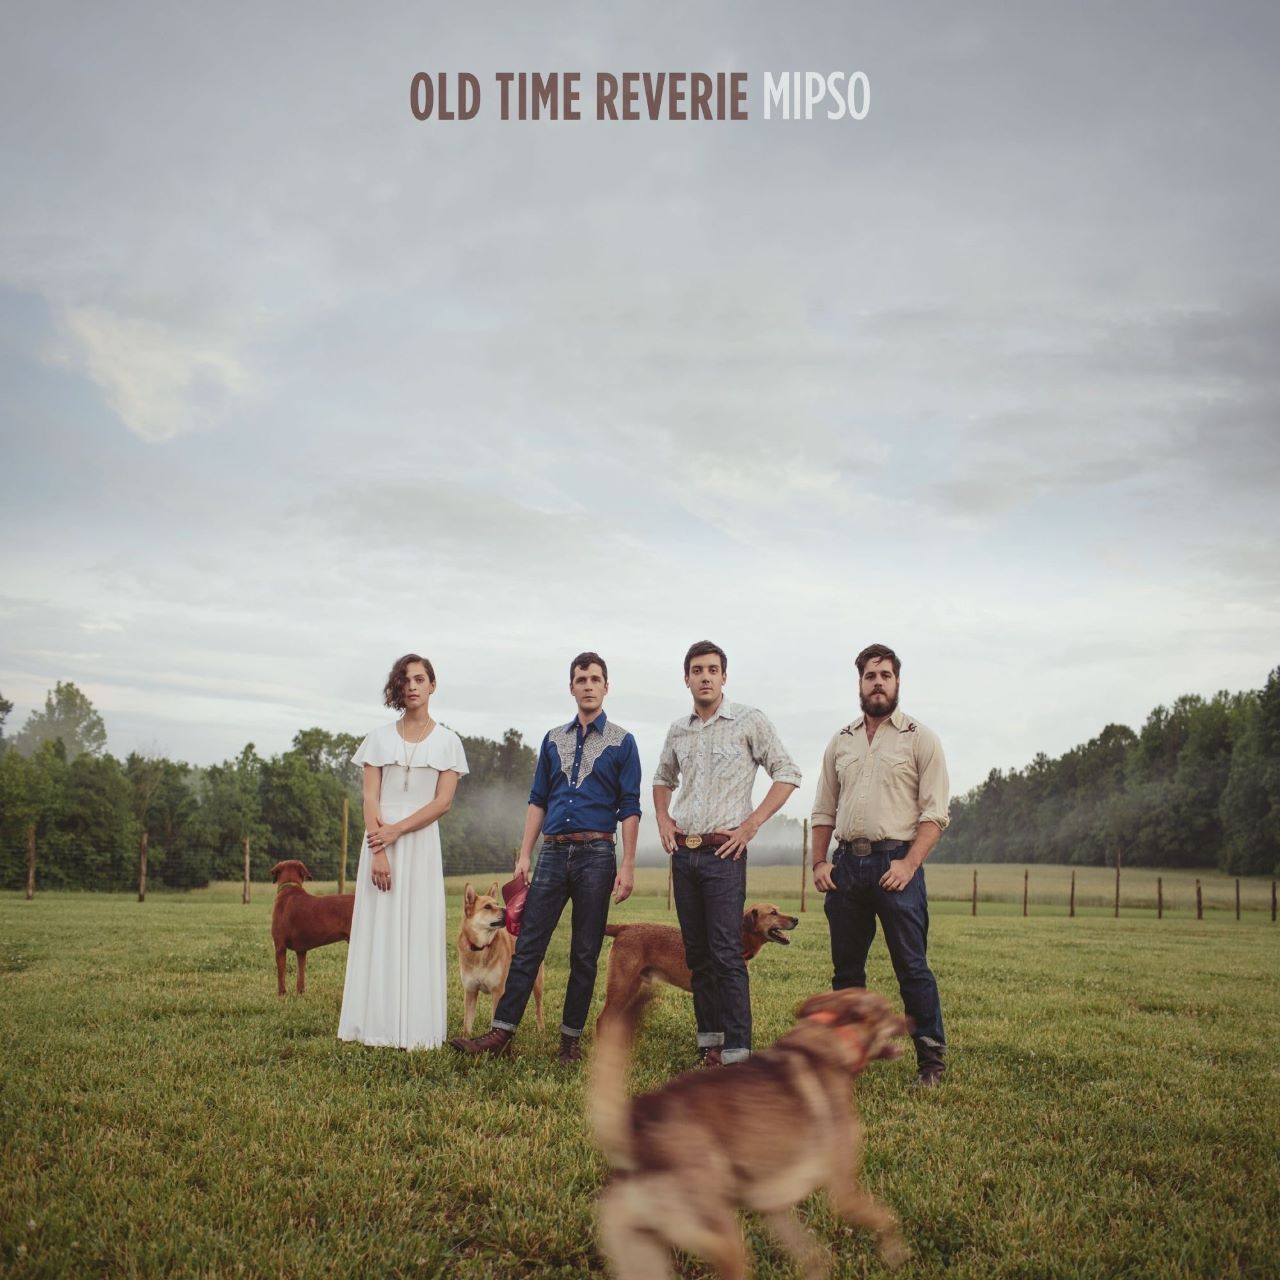 Mipso - Old Time Reverie cover album